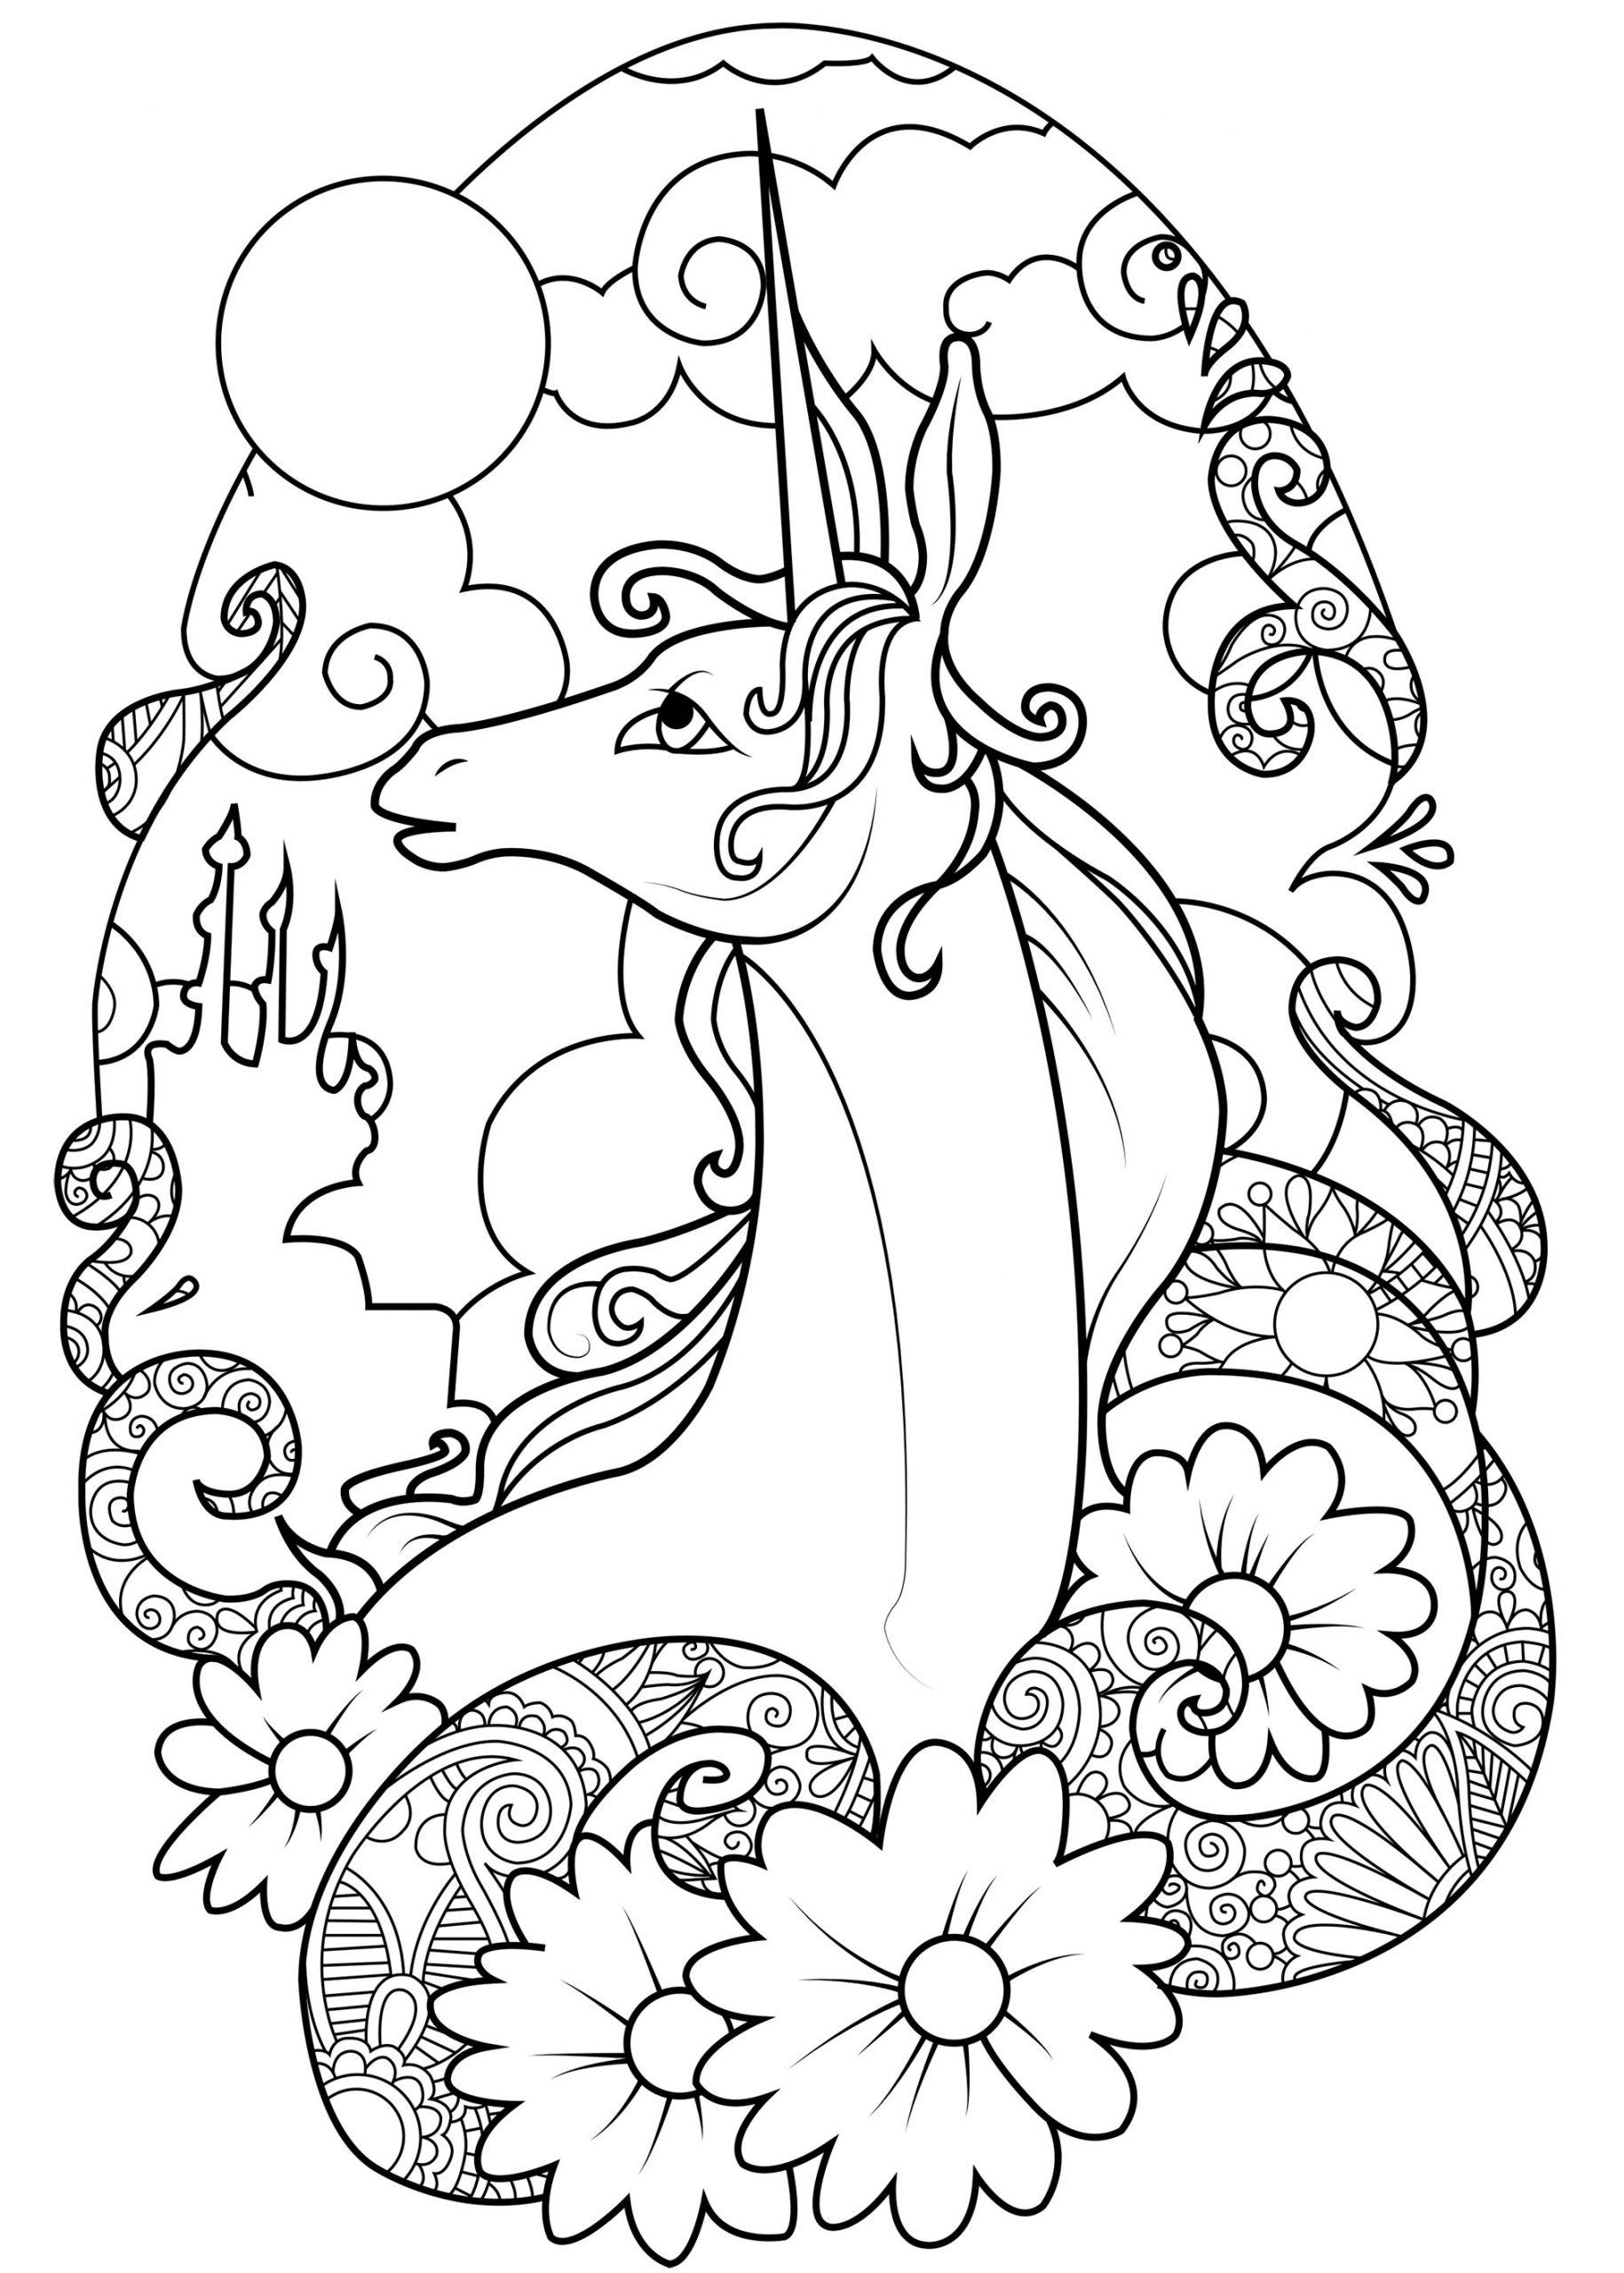 Coloring Pages : Coloring Phenomenal Detailed Unicorn Cute ...